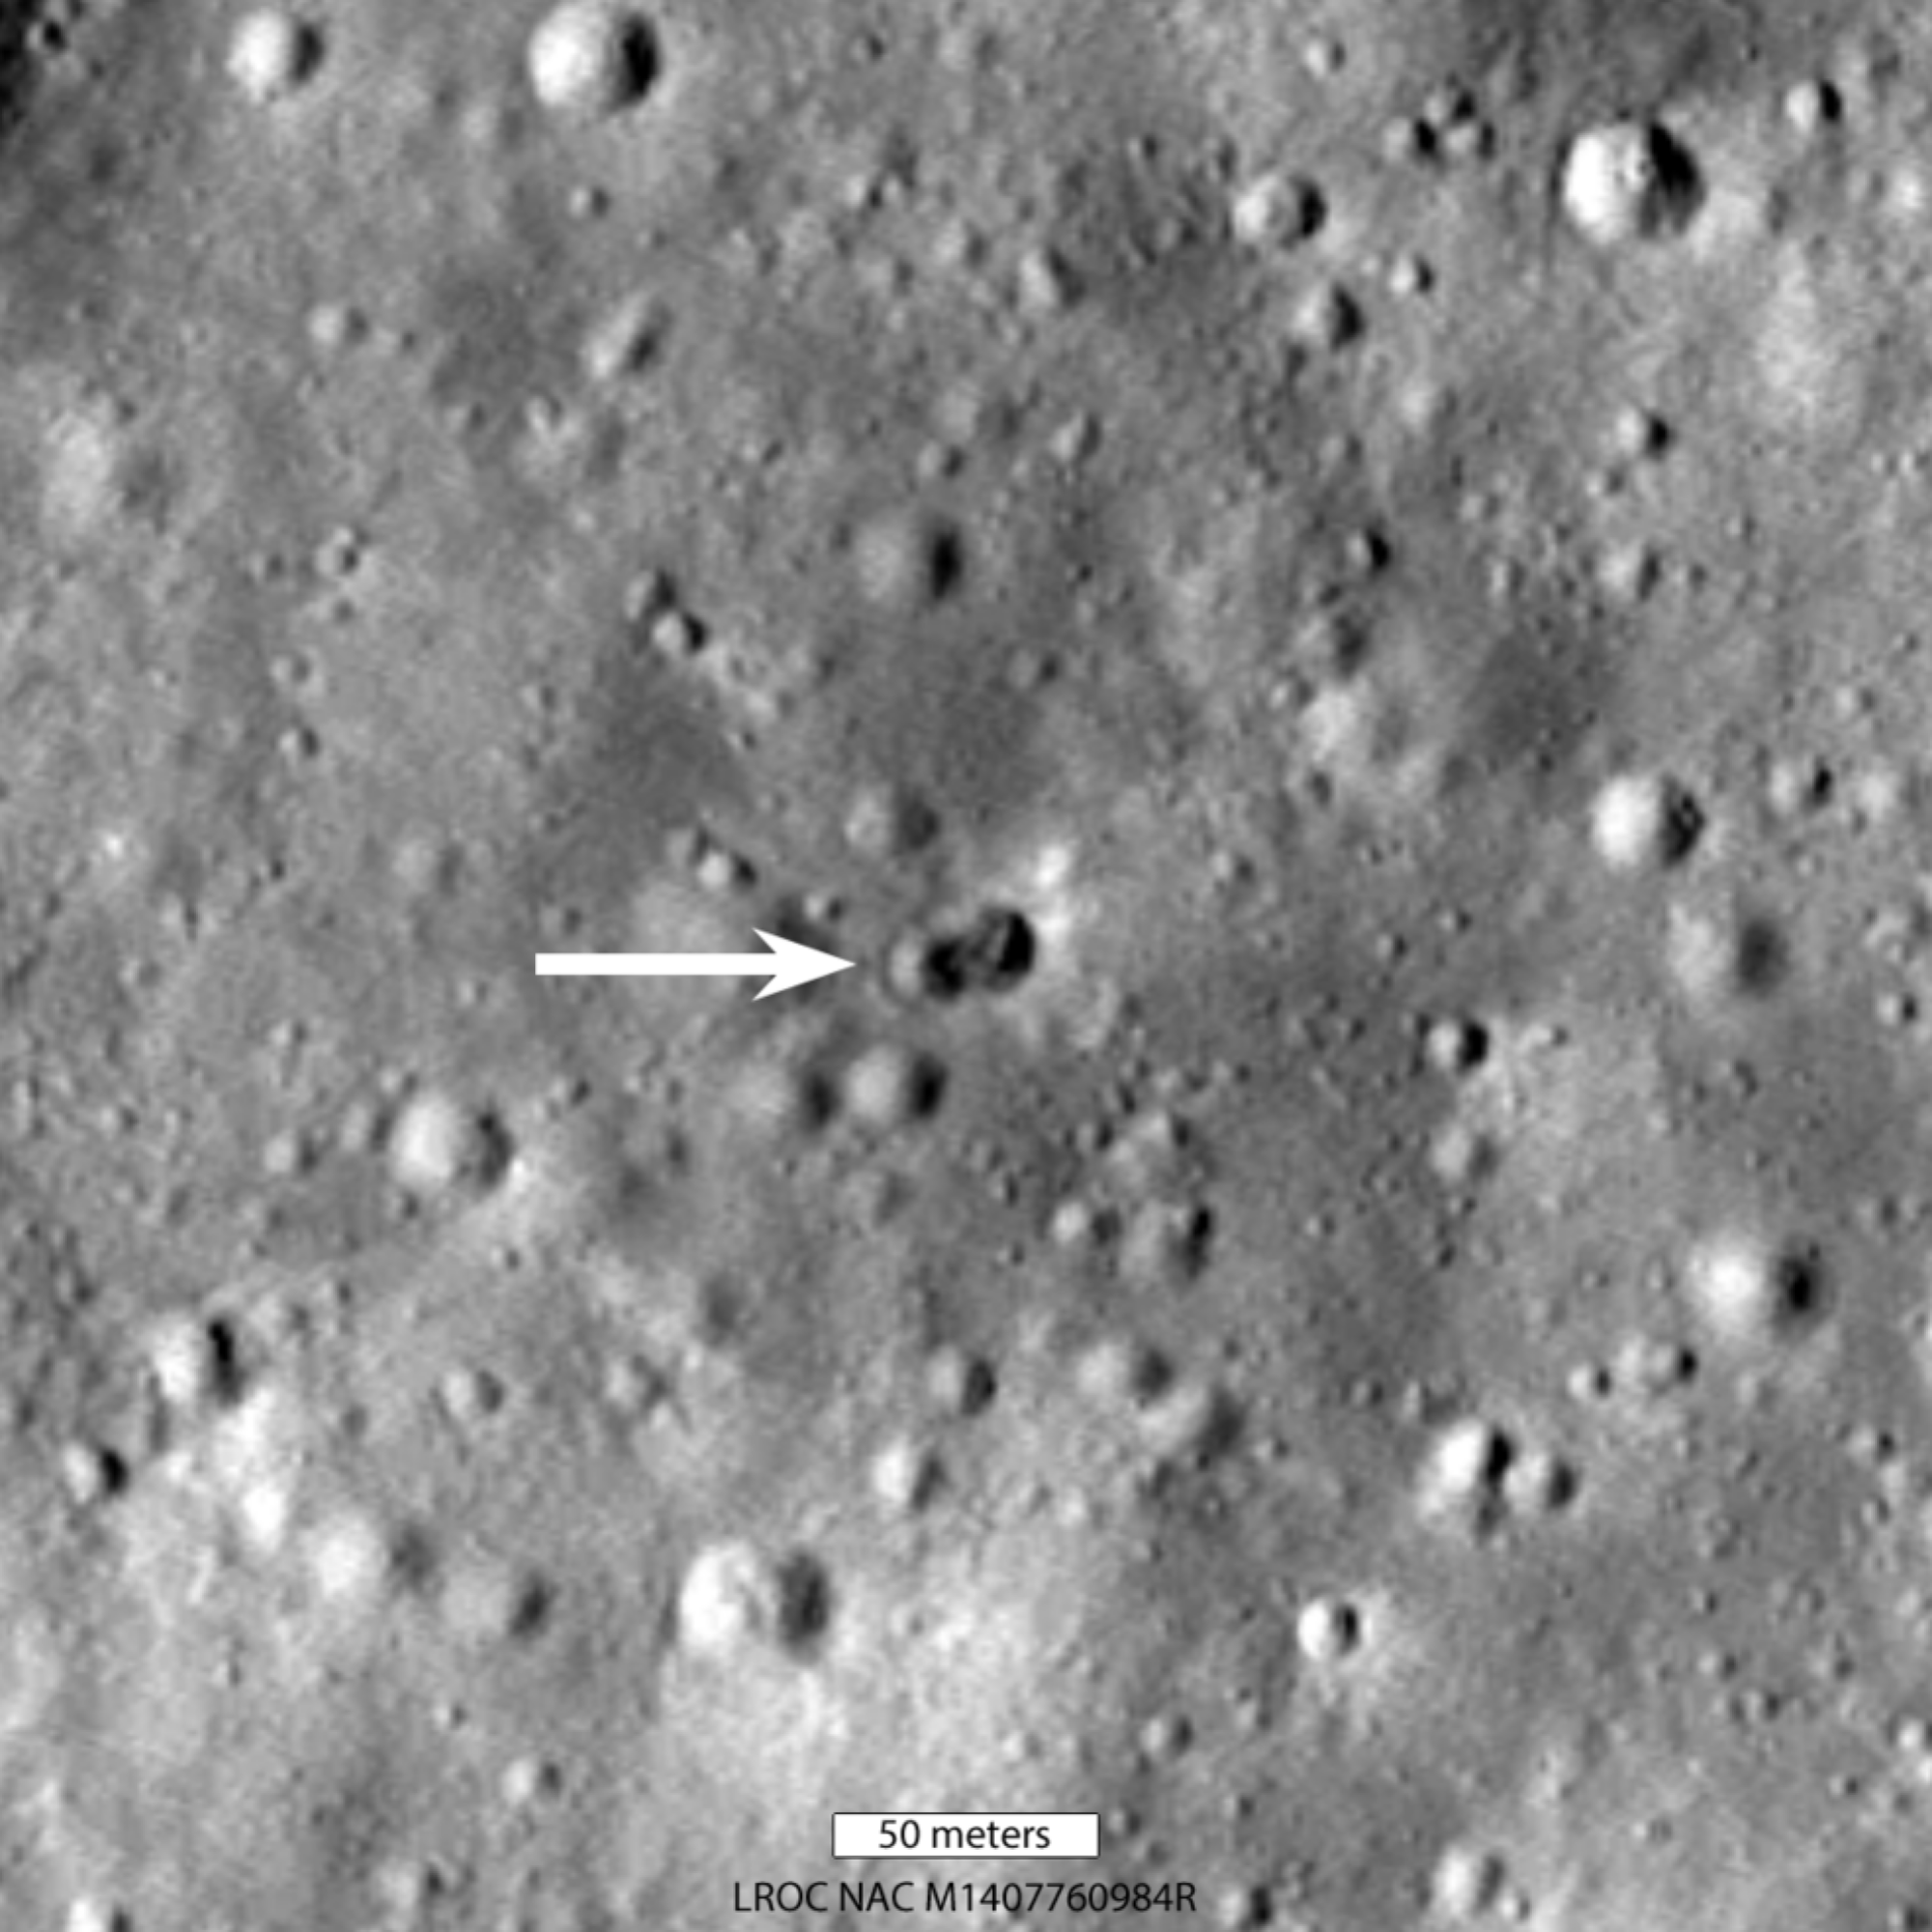 A rocket booster impacted the moon on March 4, leaving a crater on the lunar surface.